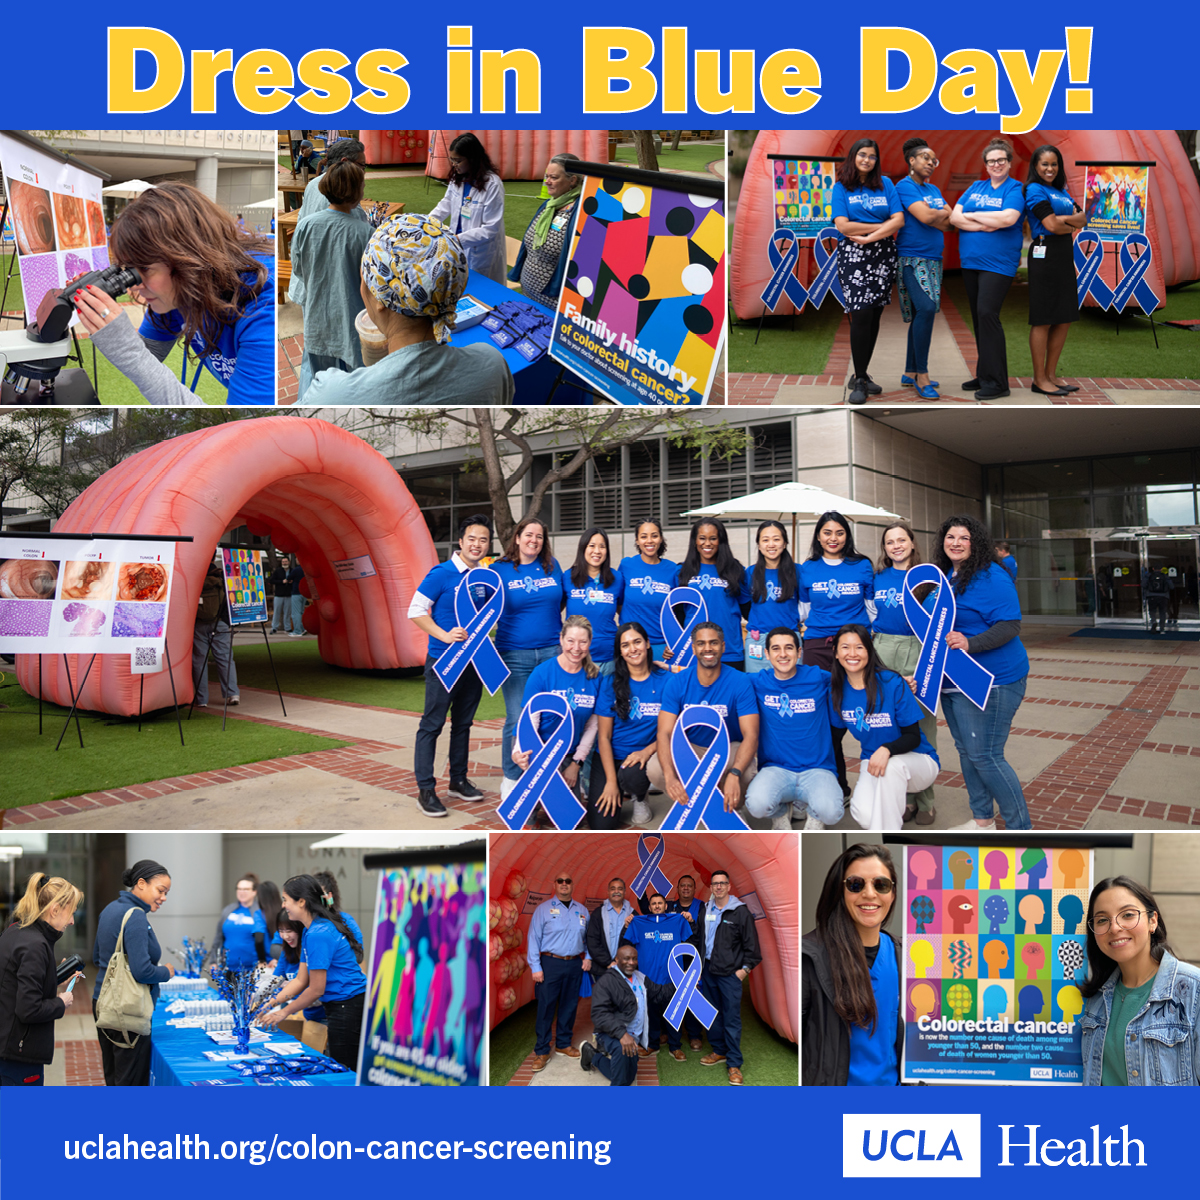 Wow! What a great #DressinBlueDay @UCLAHealth! Our #UCLAColonChampions educated 100s of people on #colorectalcancer risk and screening. 💪#ColorectalCancerAwarenessMonth 💪